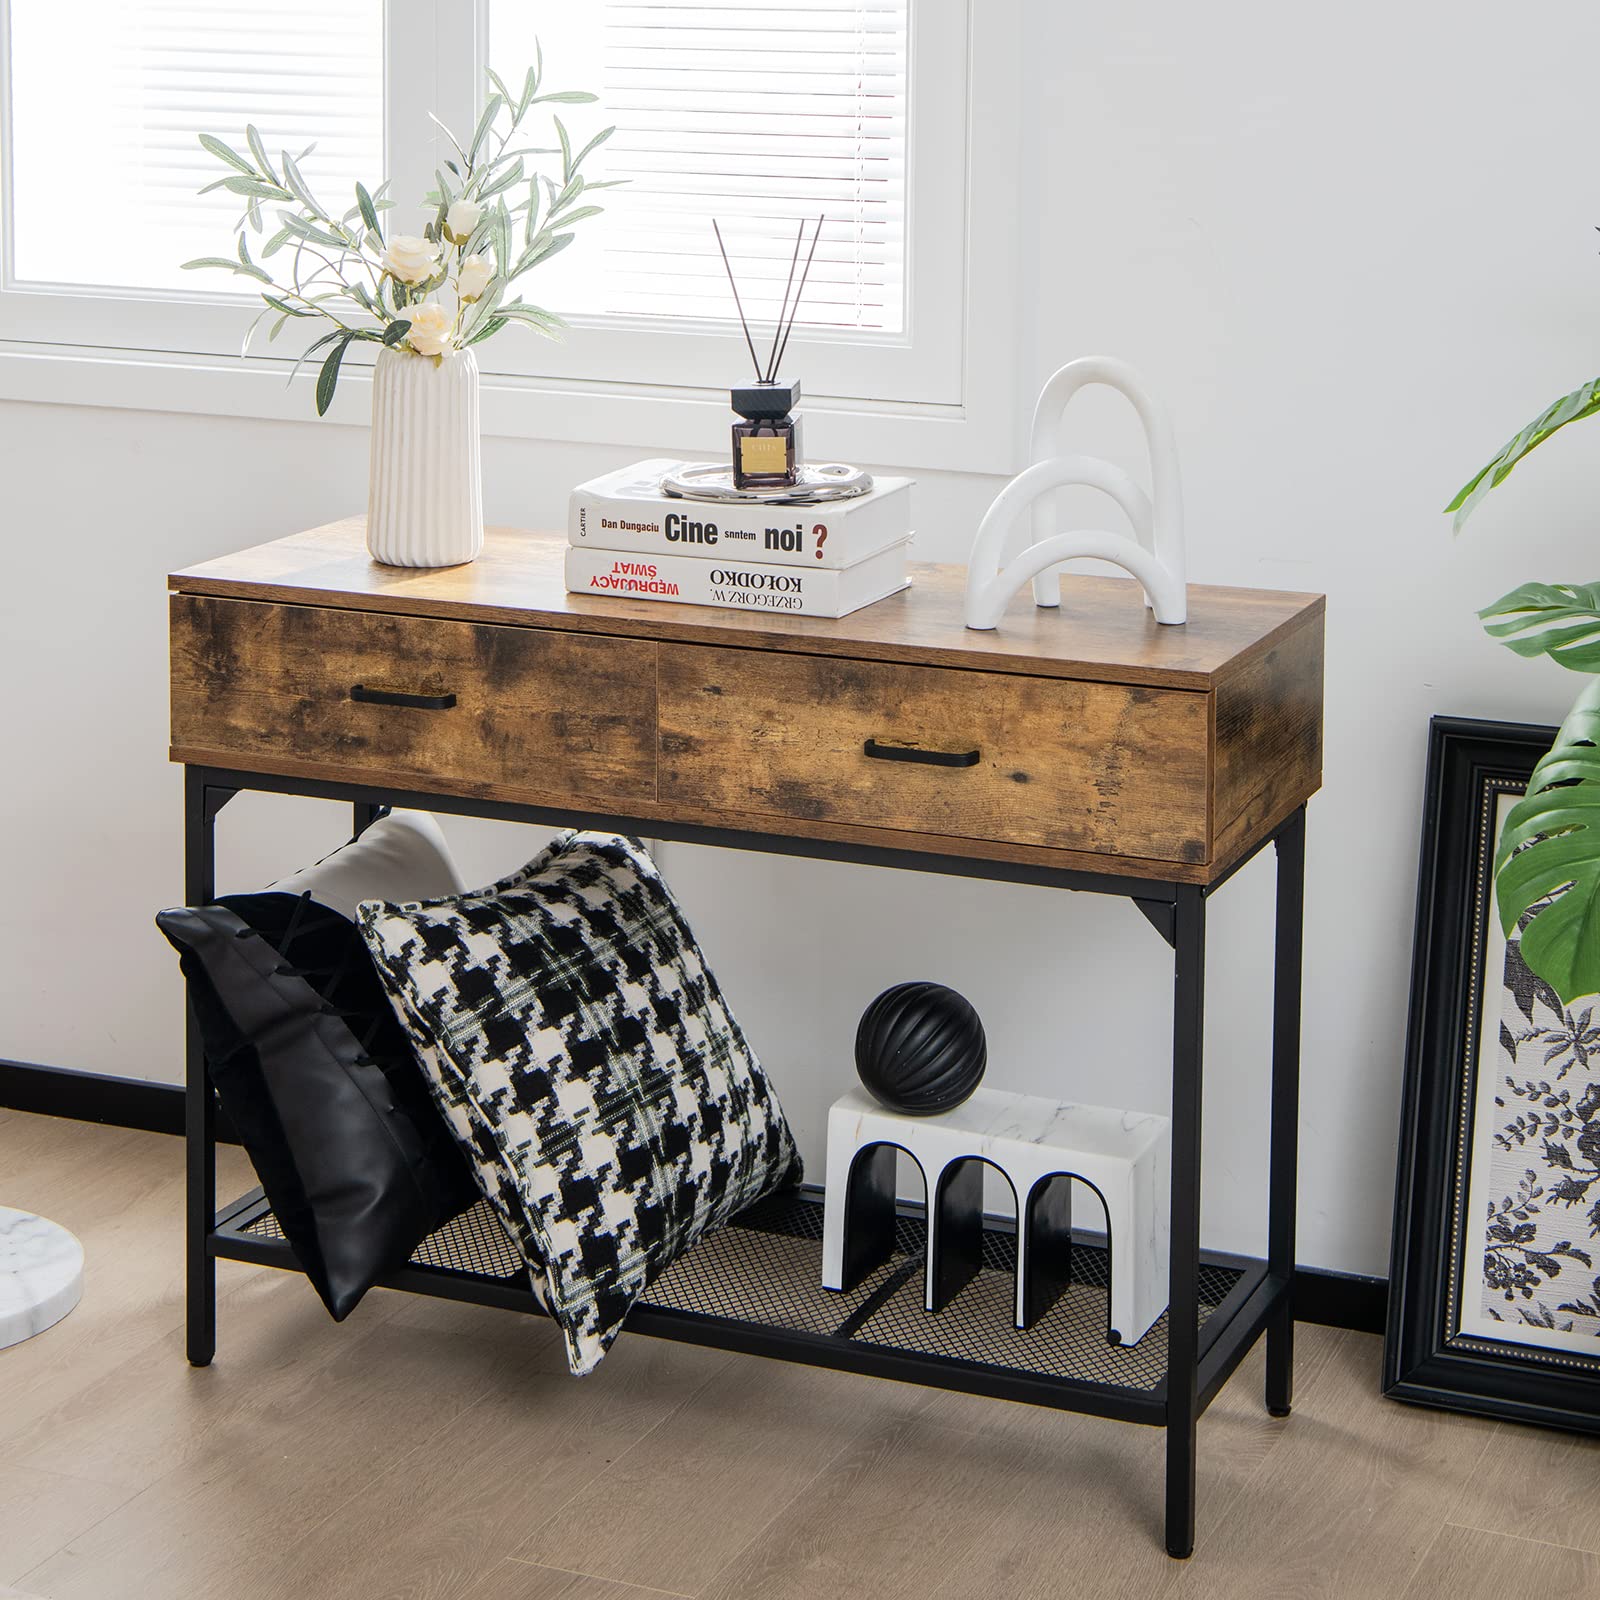 Giantex Console Table with Drawers - Industrial Hallway Table for Small Space, Long Sofa Side Table Behind Couch